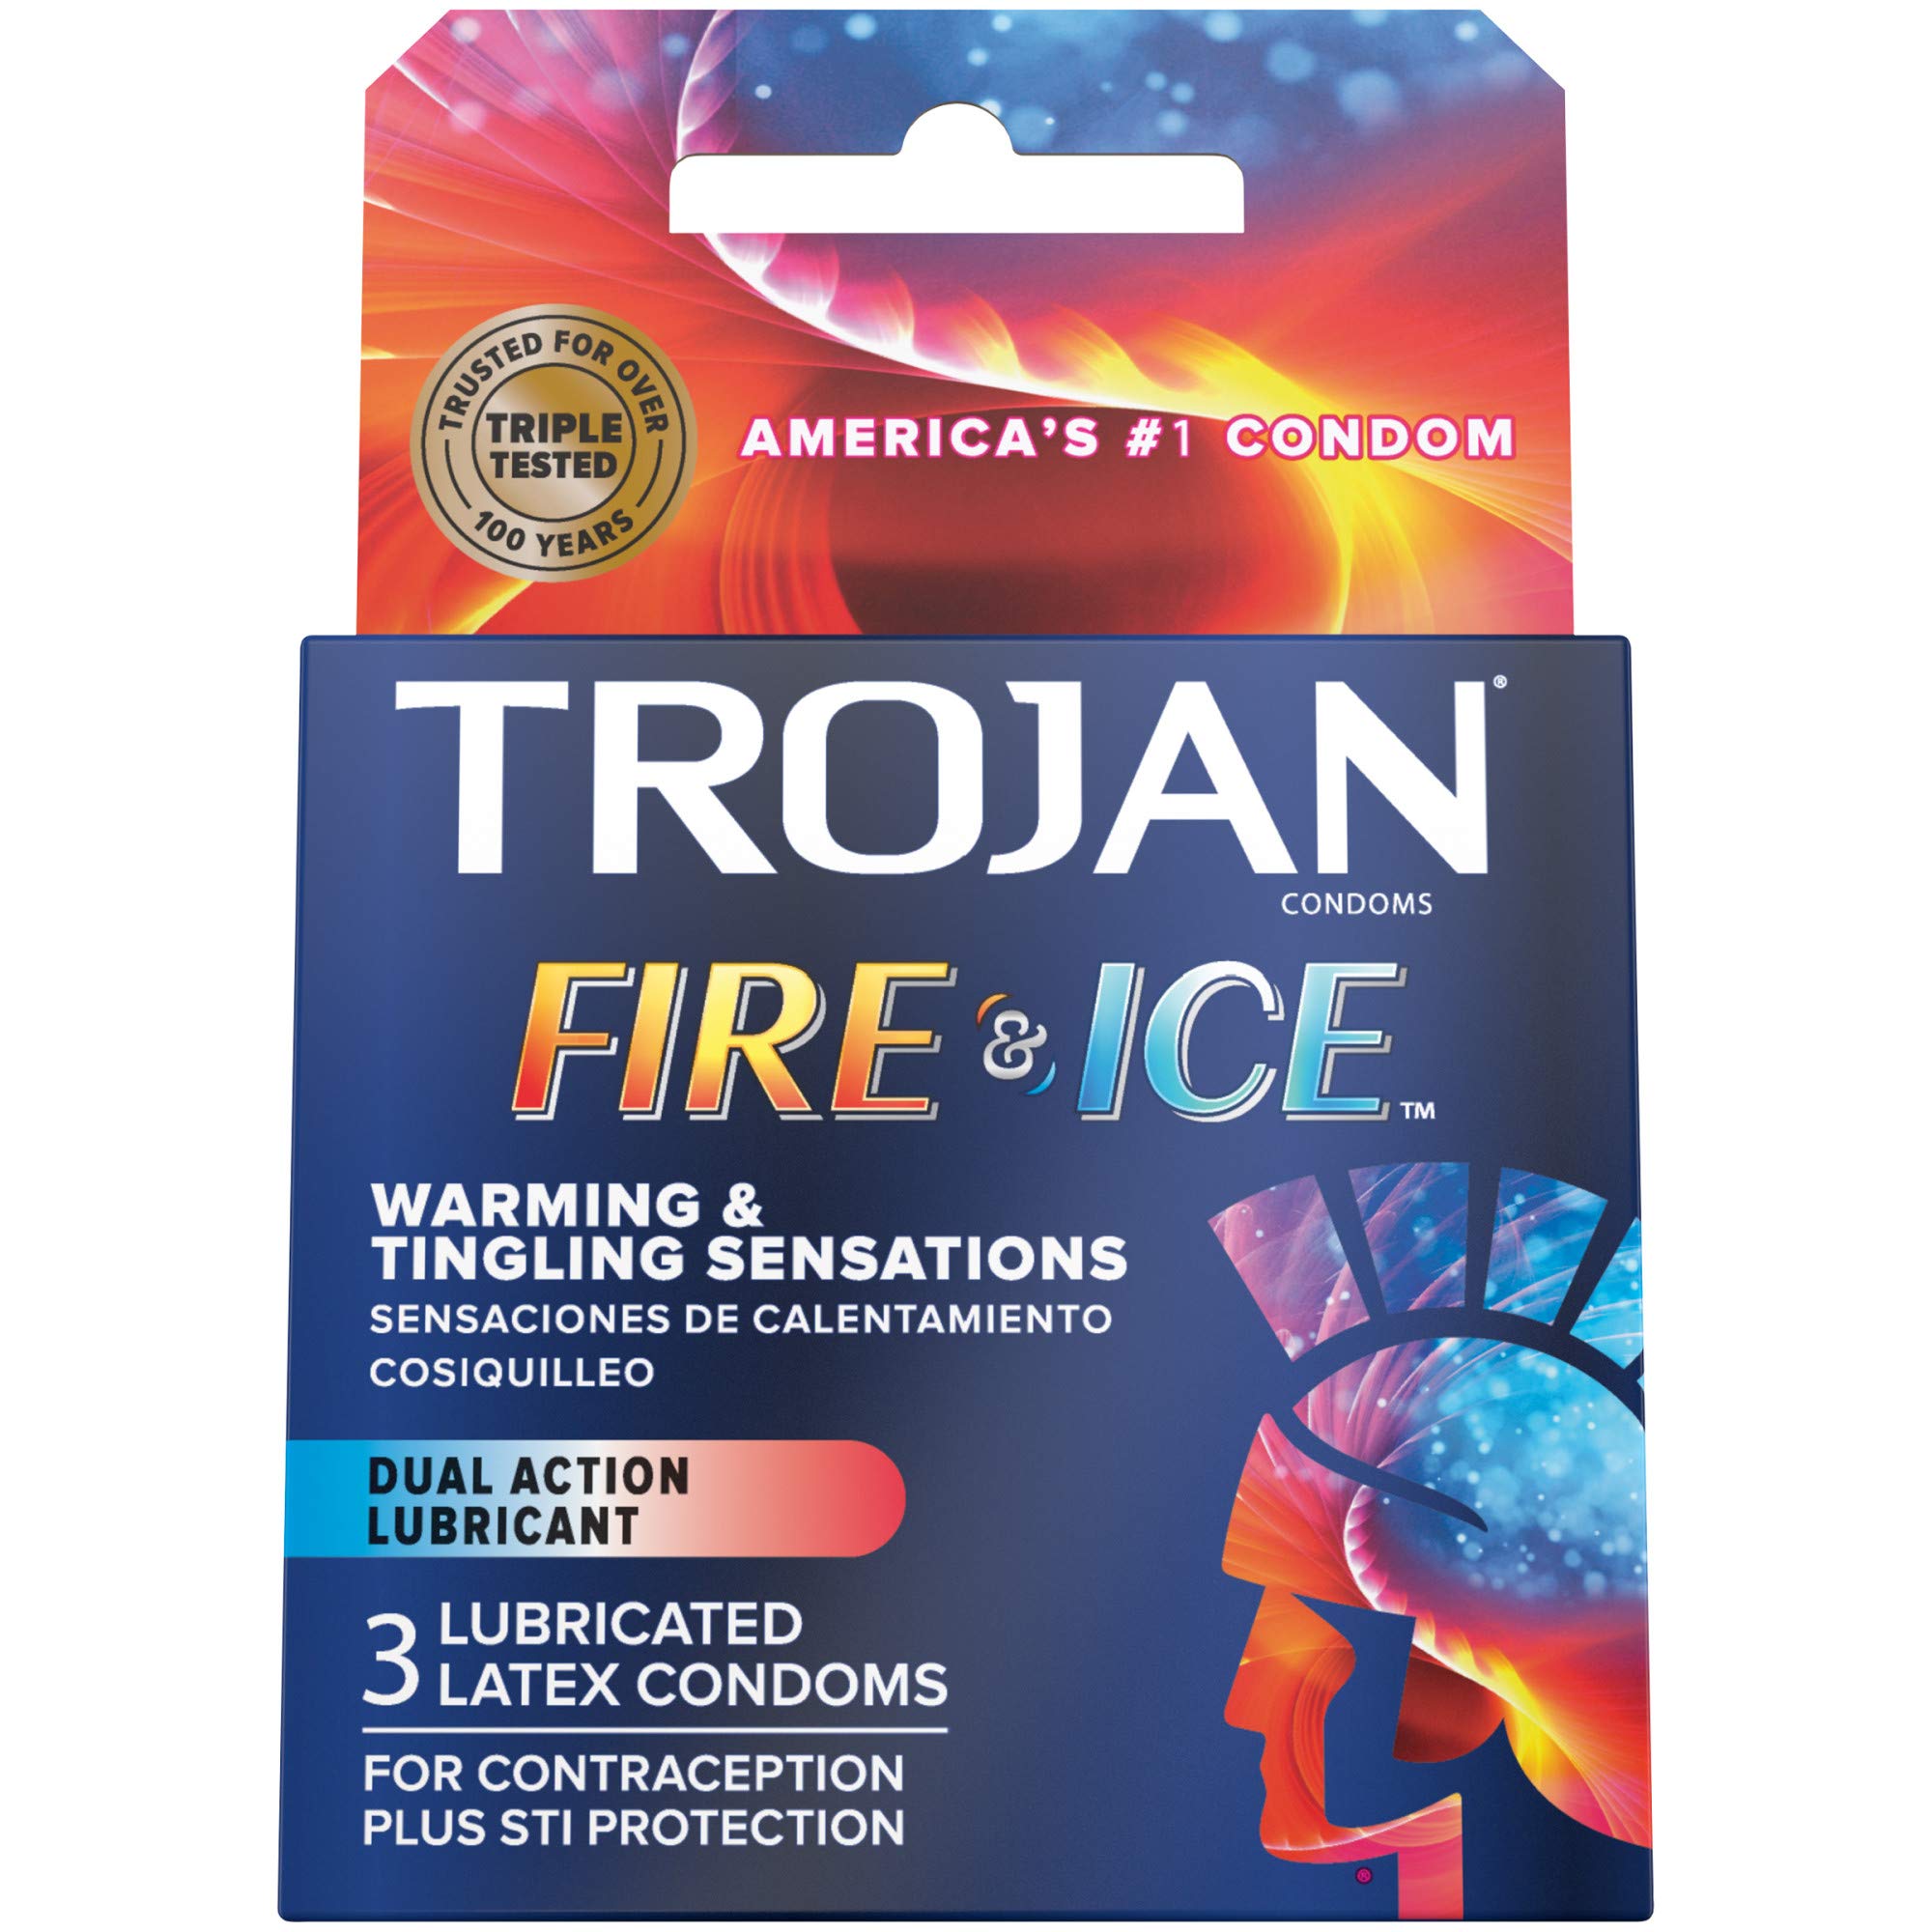 TROJAN Fire & Ice Dual Action Condoms, 3 Count